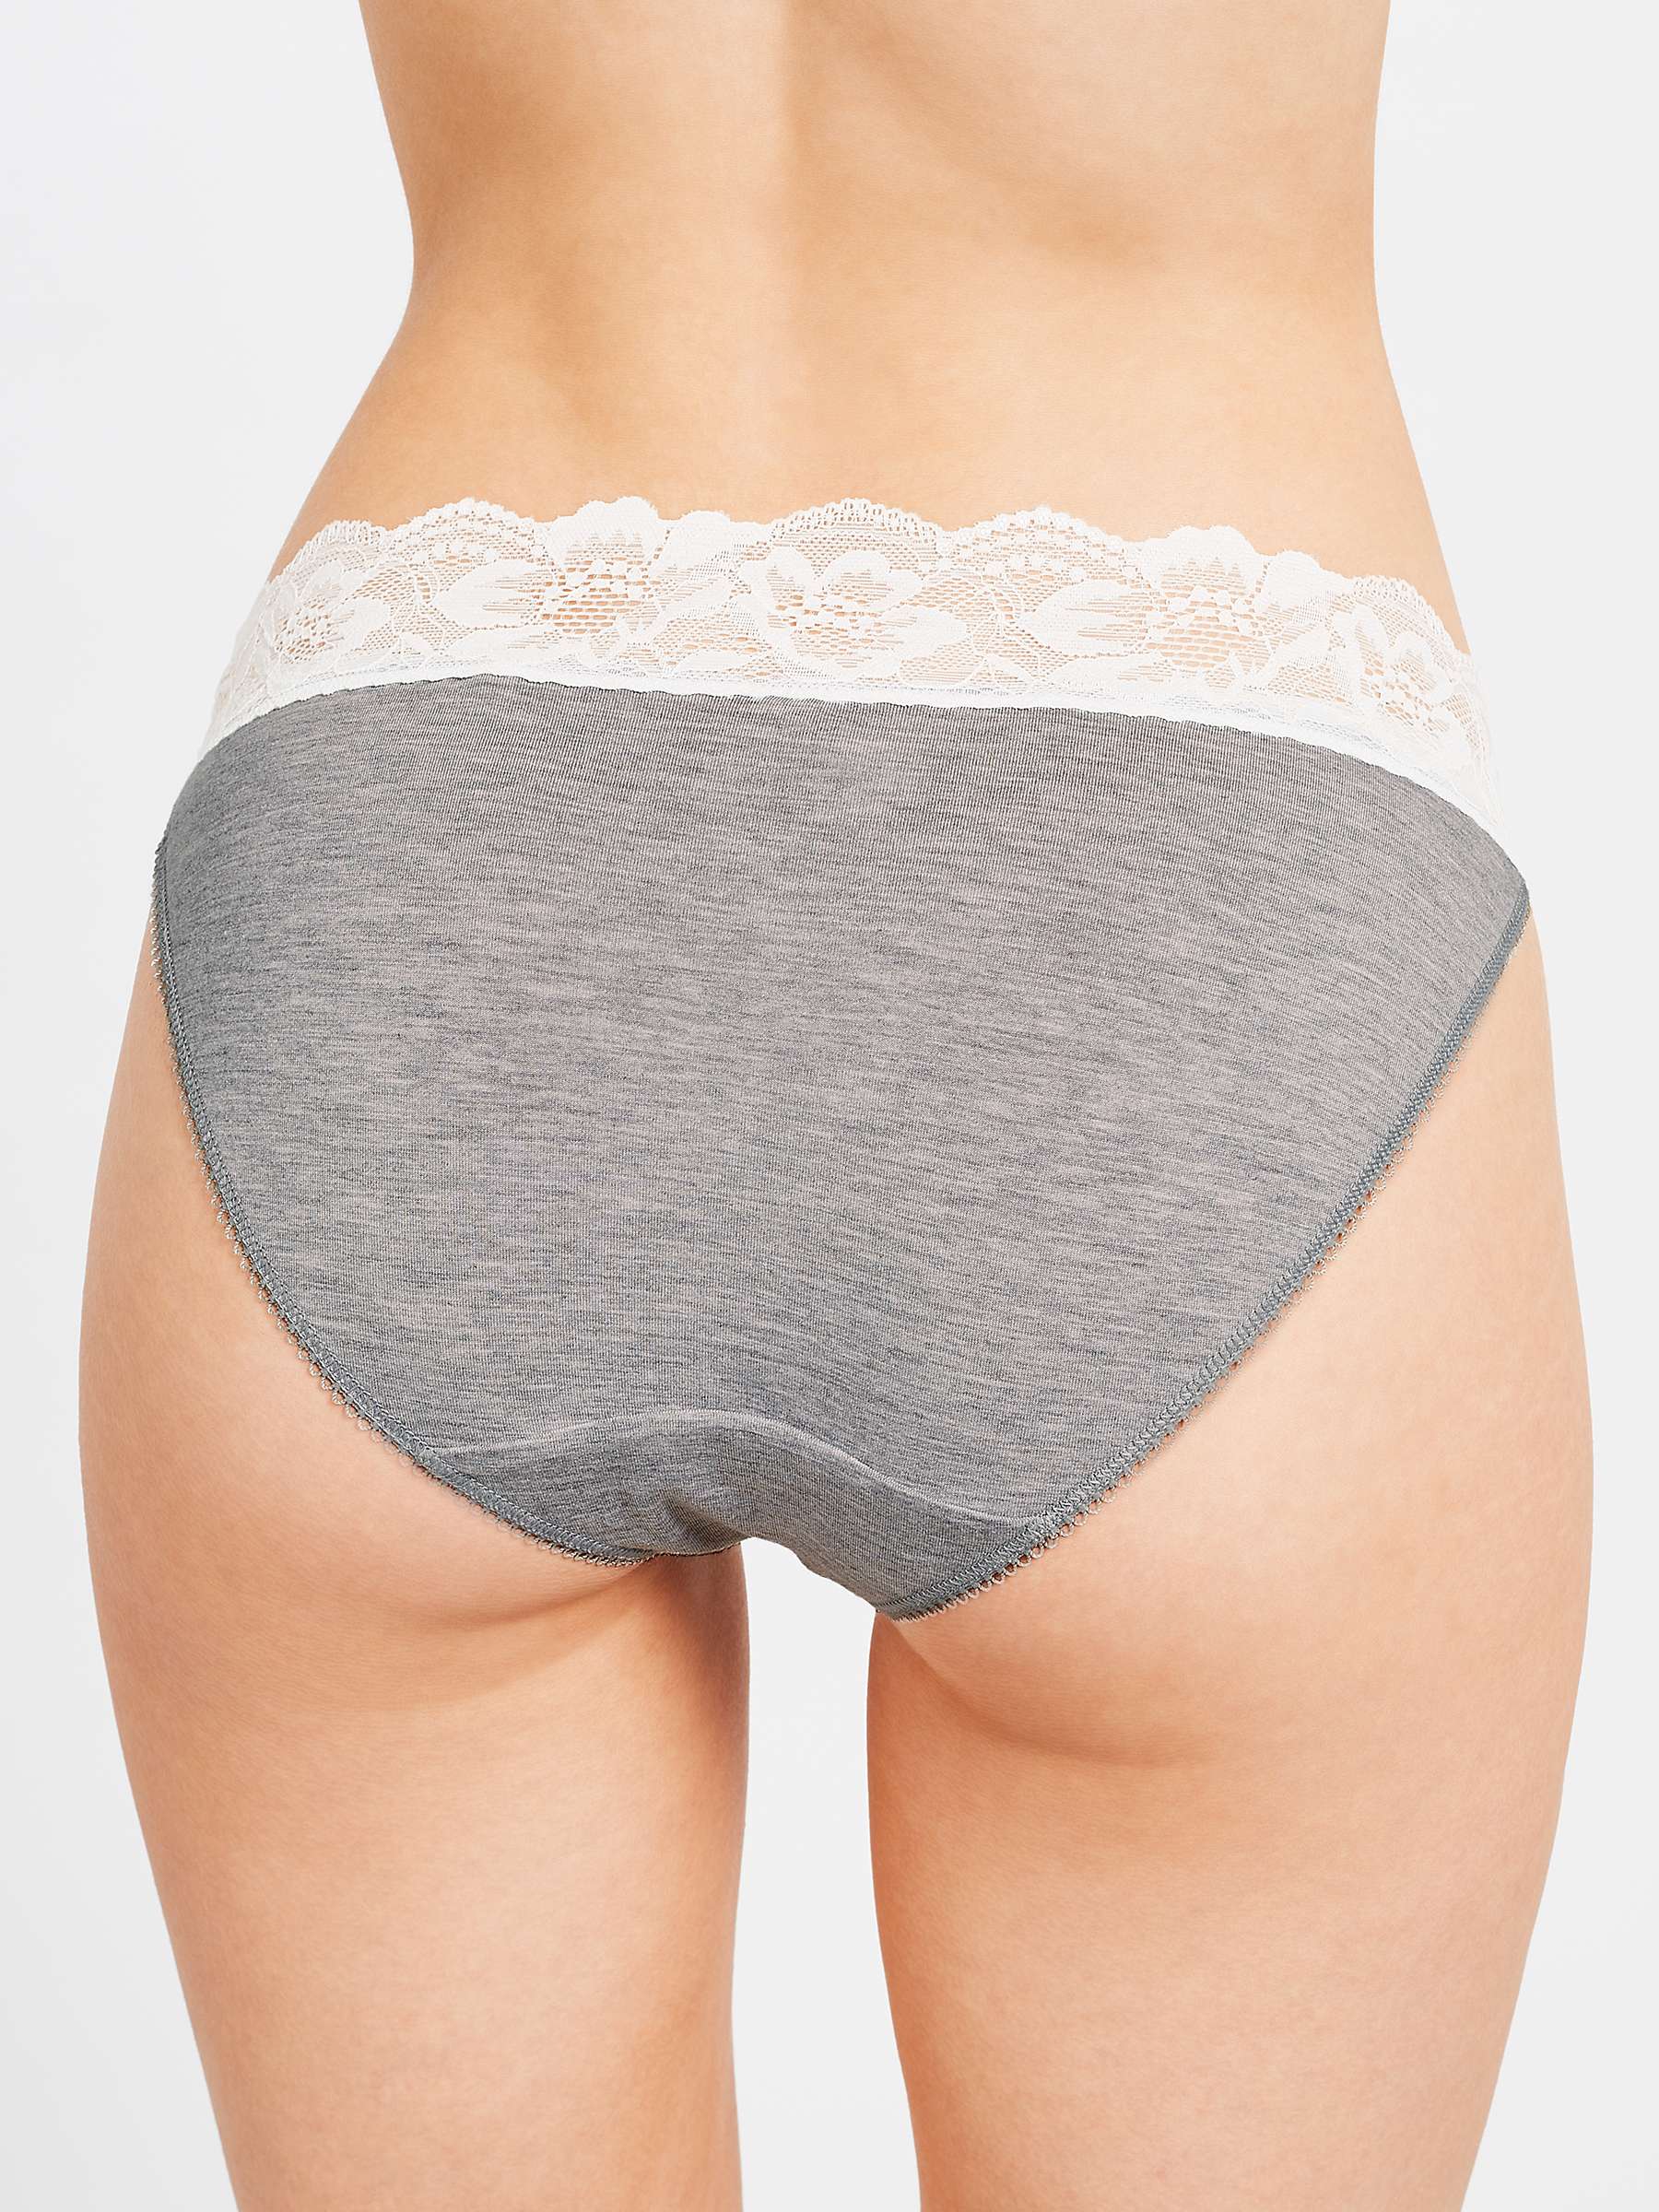 Buy John Lewis ANYDAY Lace Trim Tanga Knickers, Pack of 3 Online at johnlewis.com